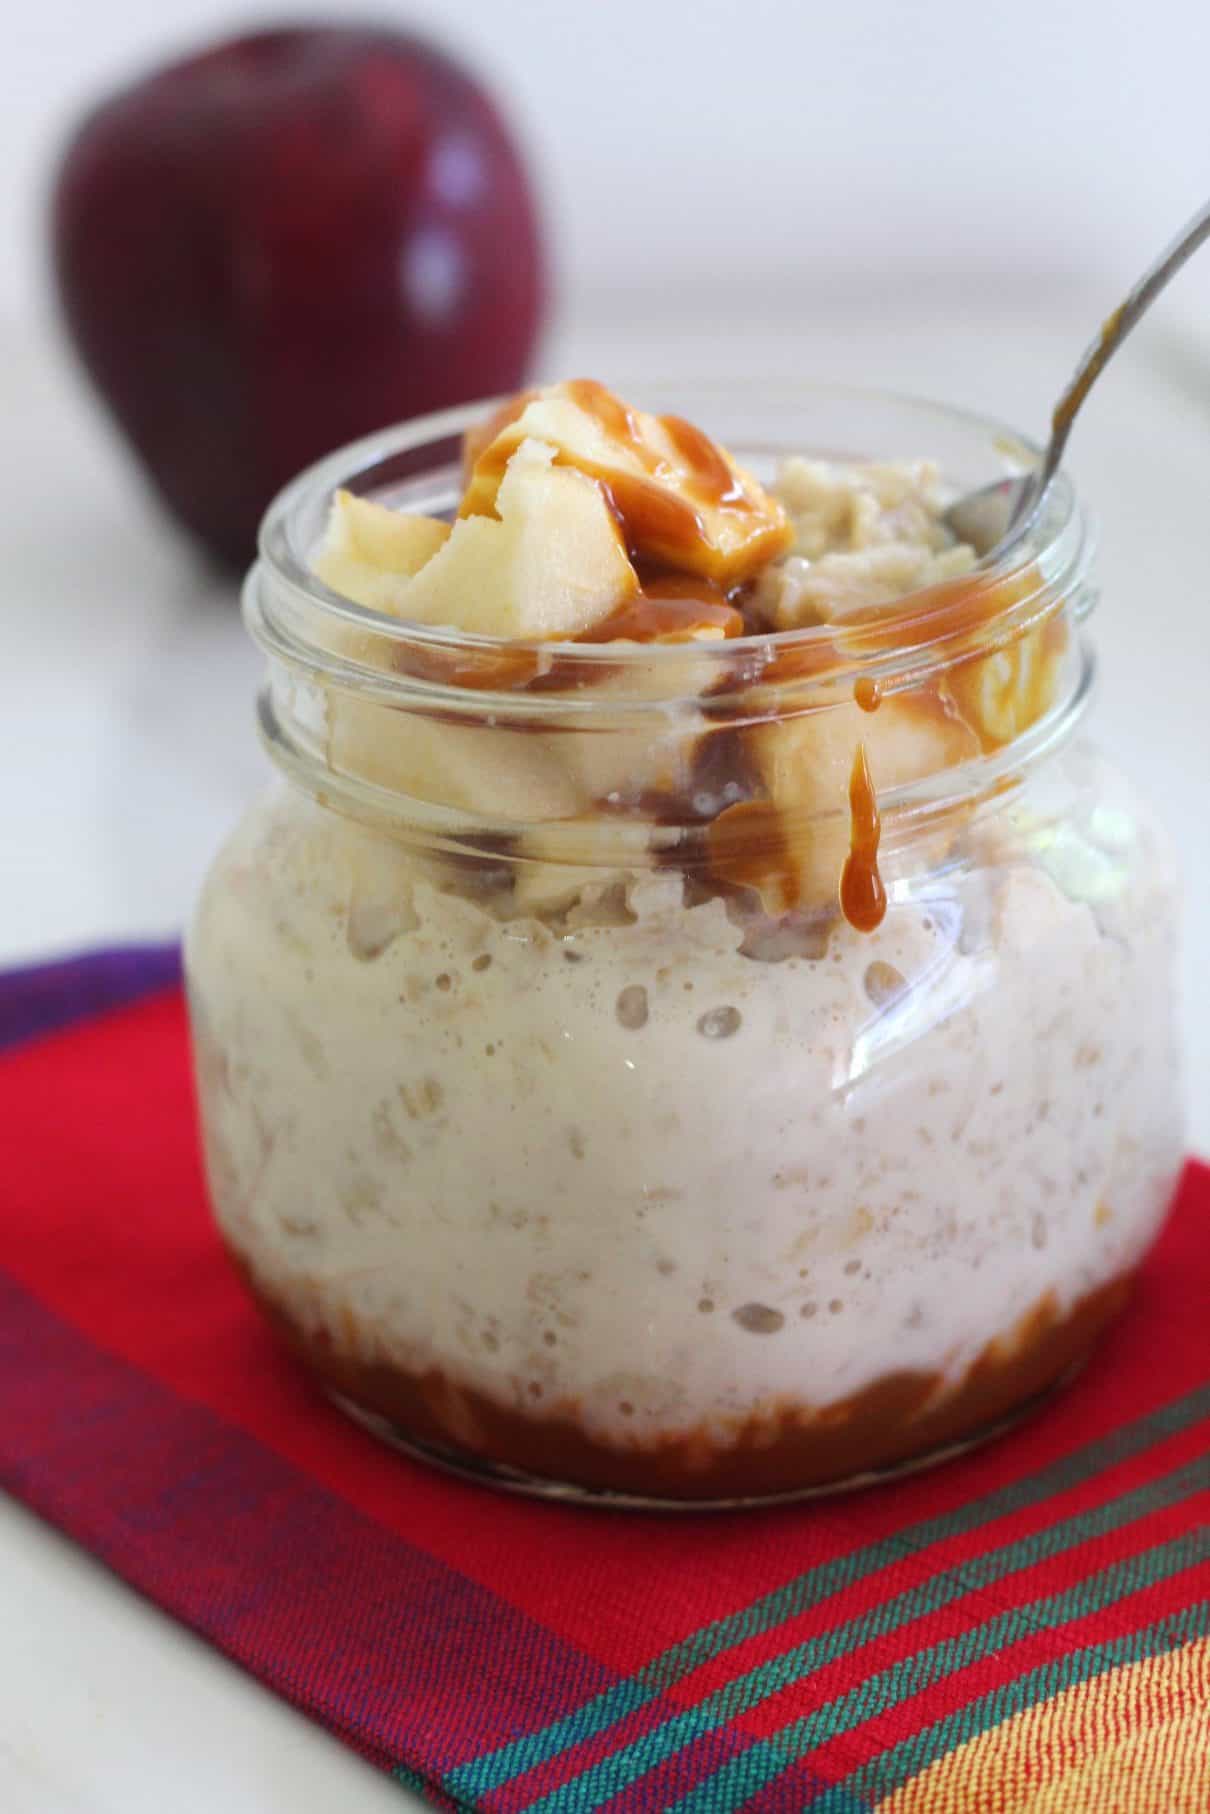 Creamy oatmeal topped with crisp apples and dulce de leche, ready to be dug in. Breakfast jar is placed over a red napkin and spoon is already in the jar. There's a little drizzle of dulce de leche dripping on the outside of the jar. 